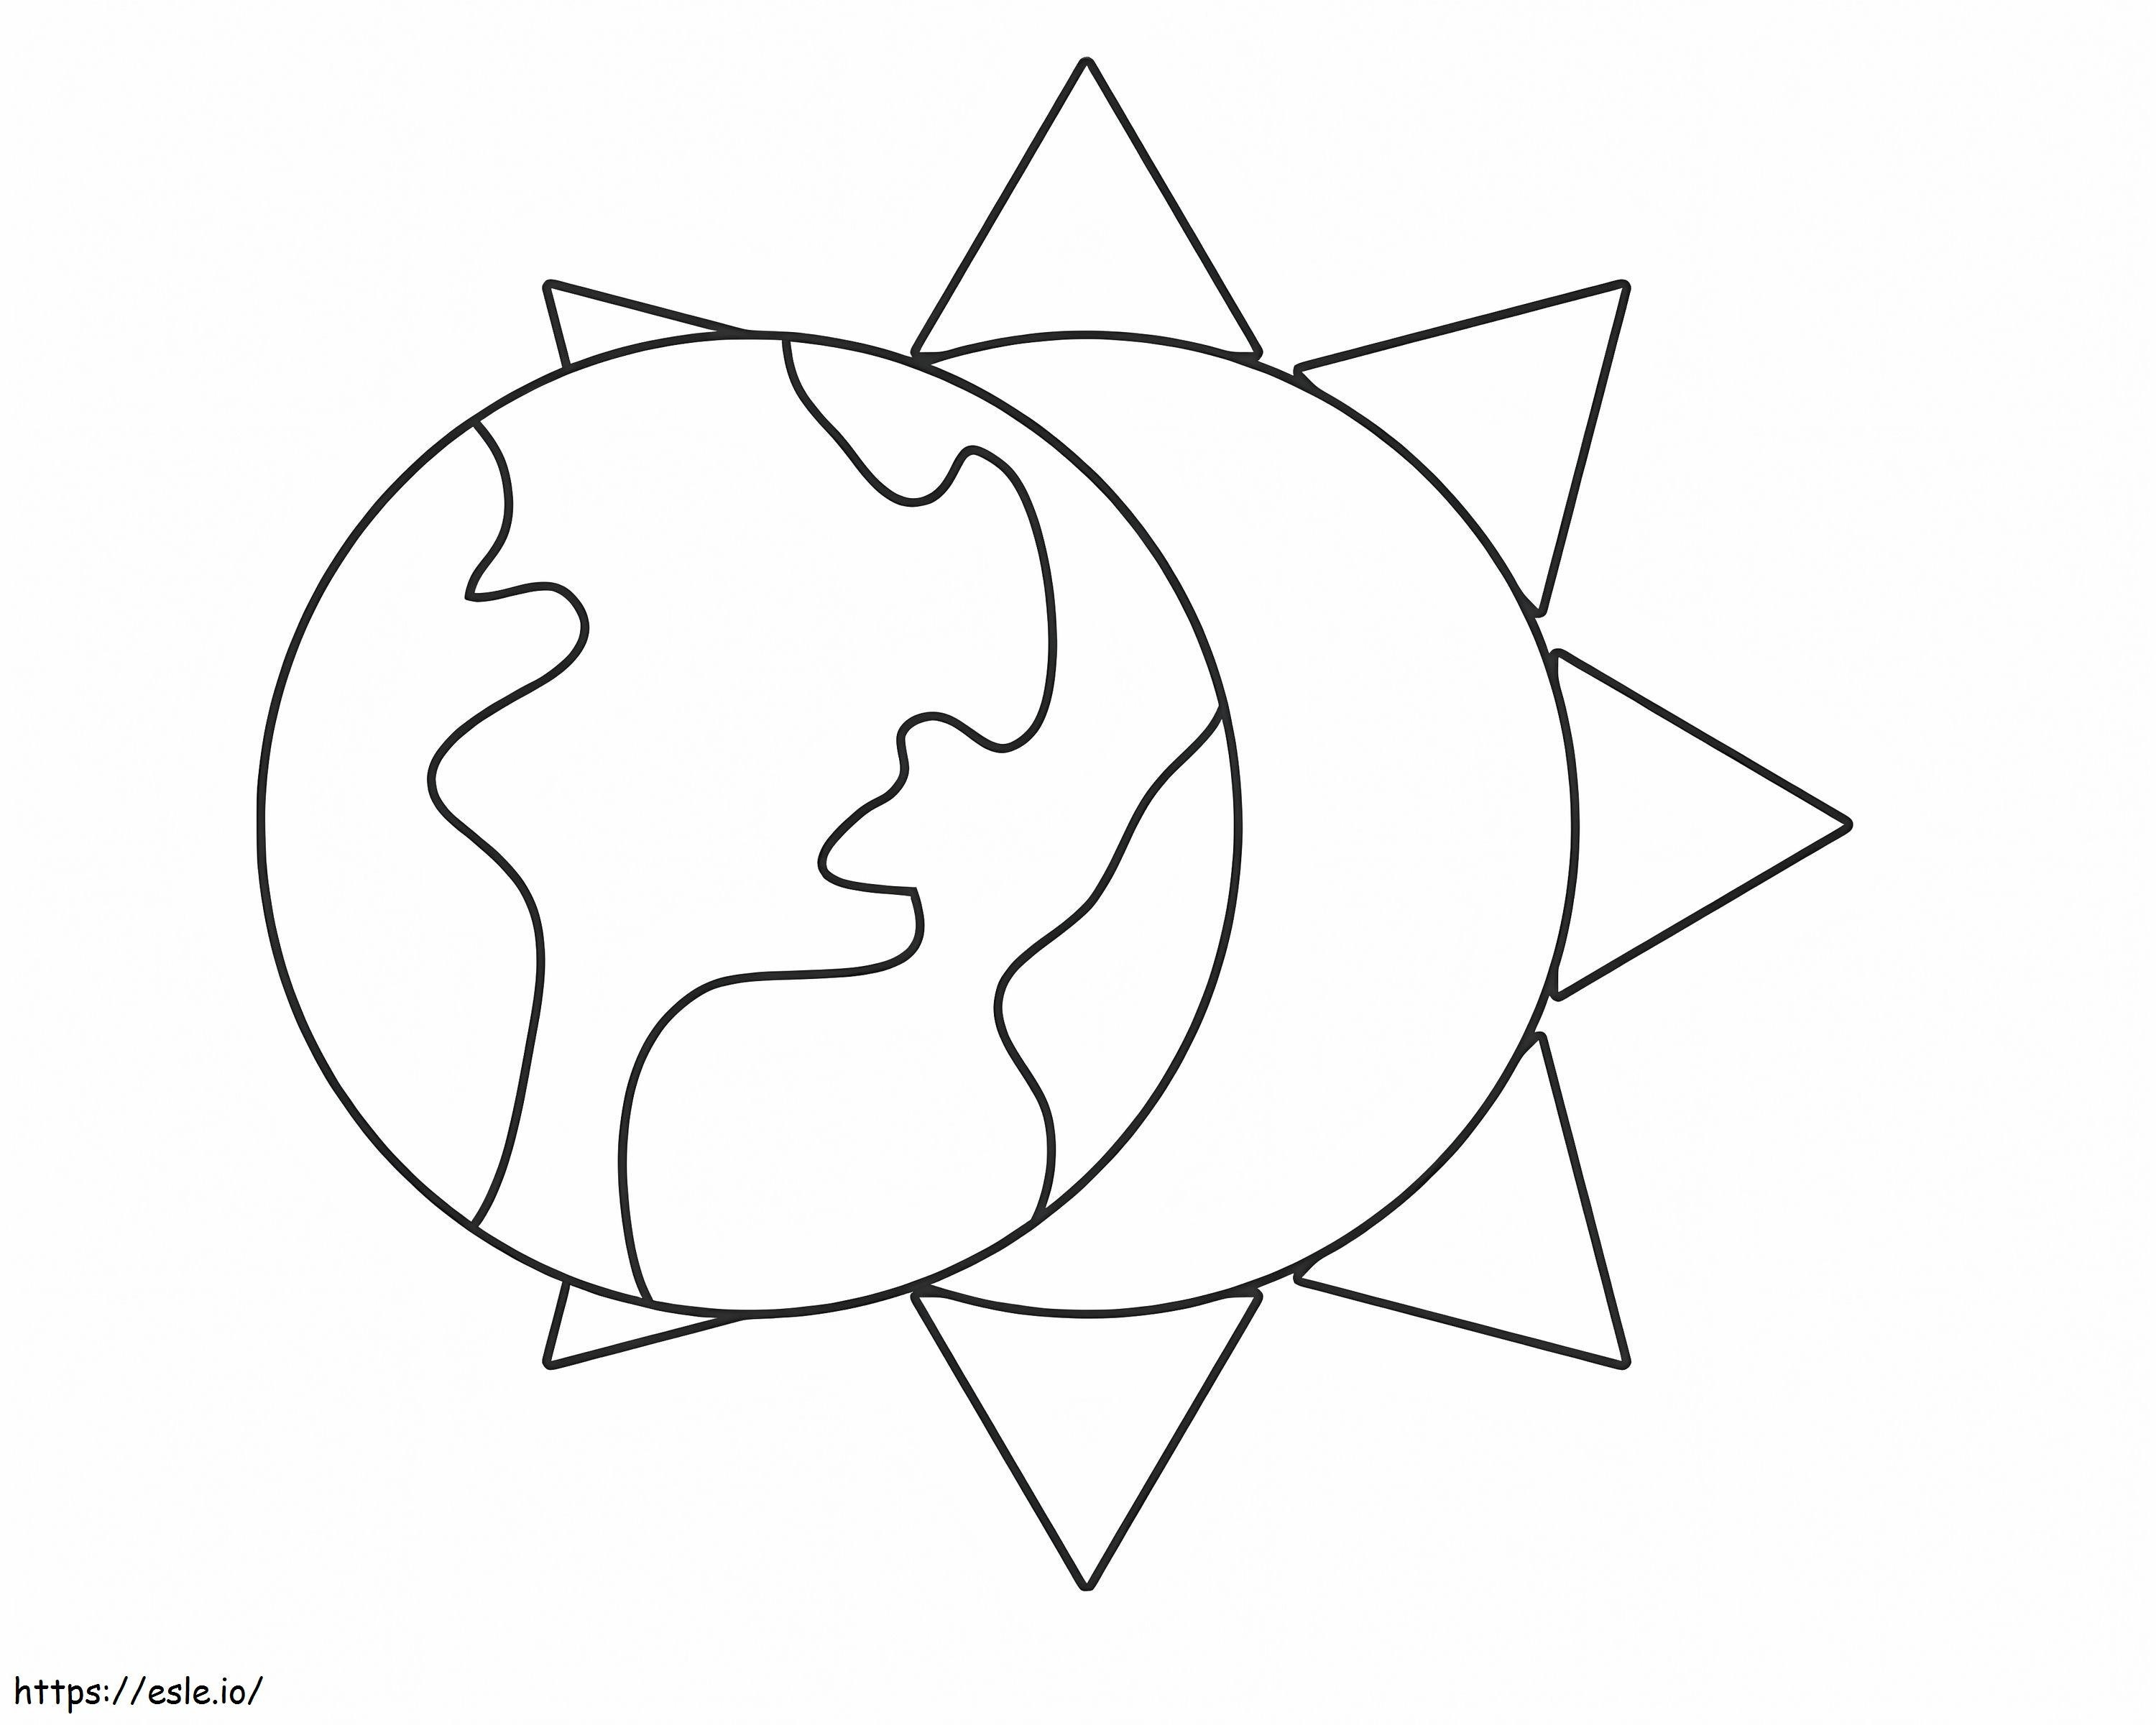 Earth And Sun coloring page